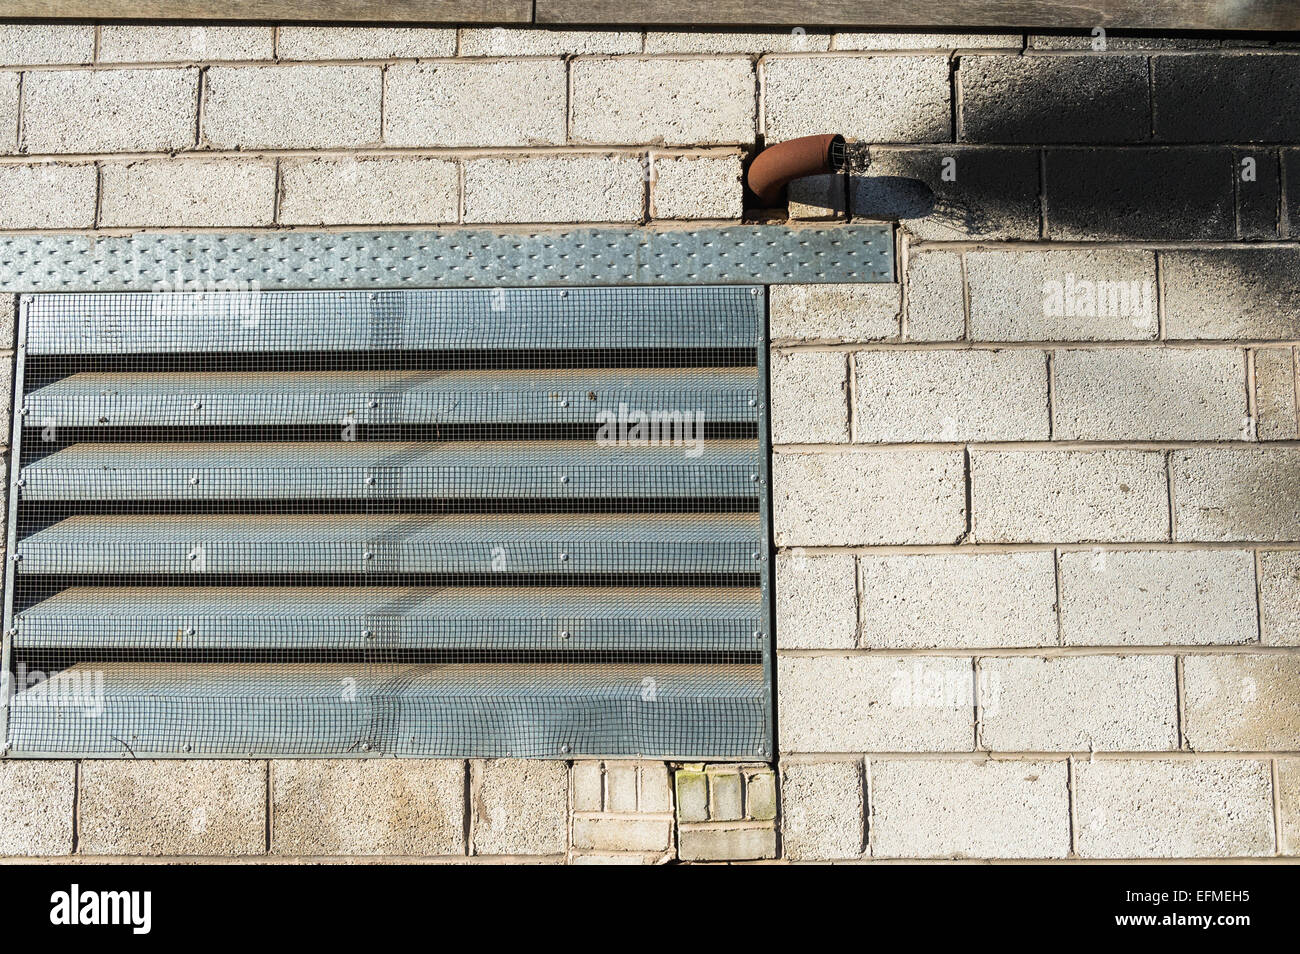 Metal exhaust pipe coming from a block built building with soot stains. Stock Photo